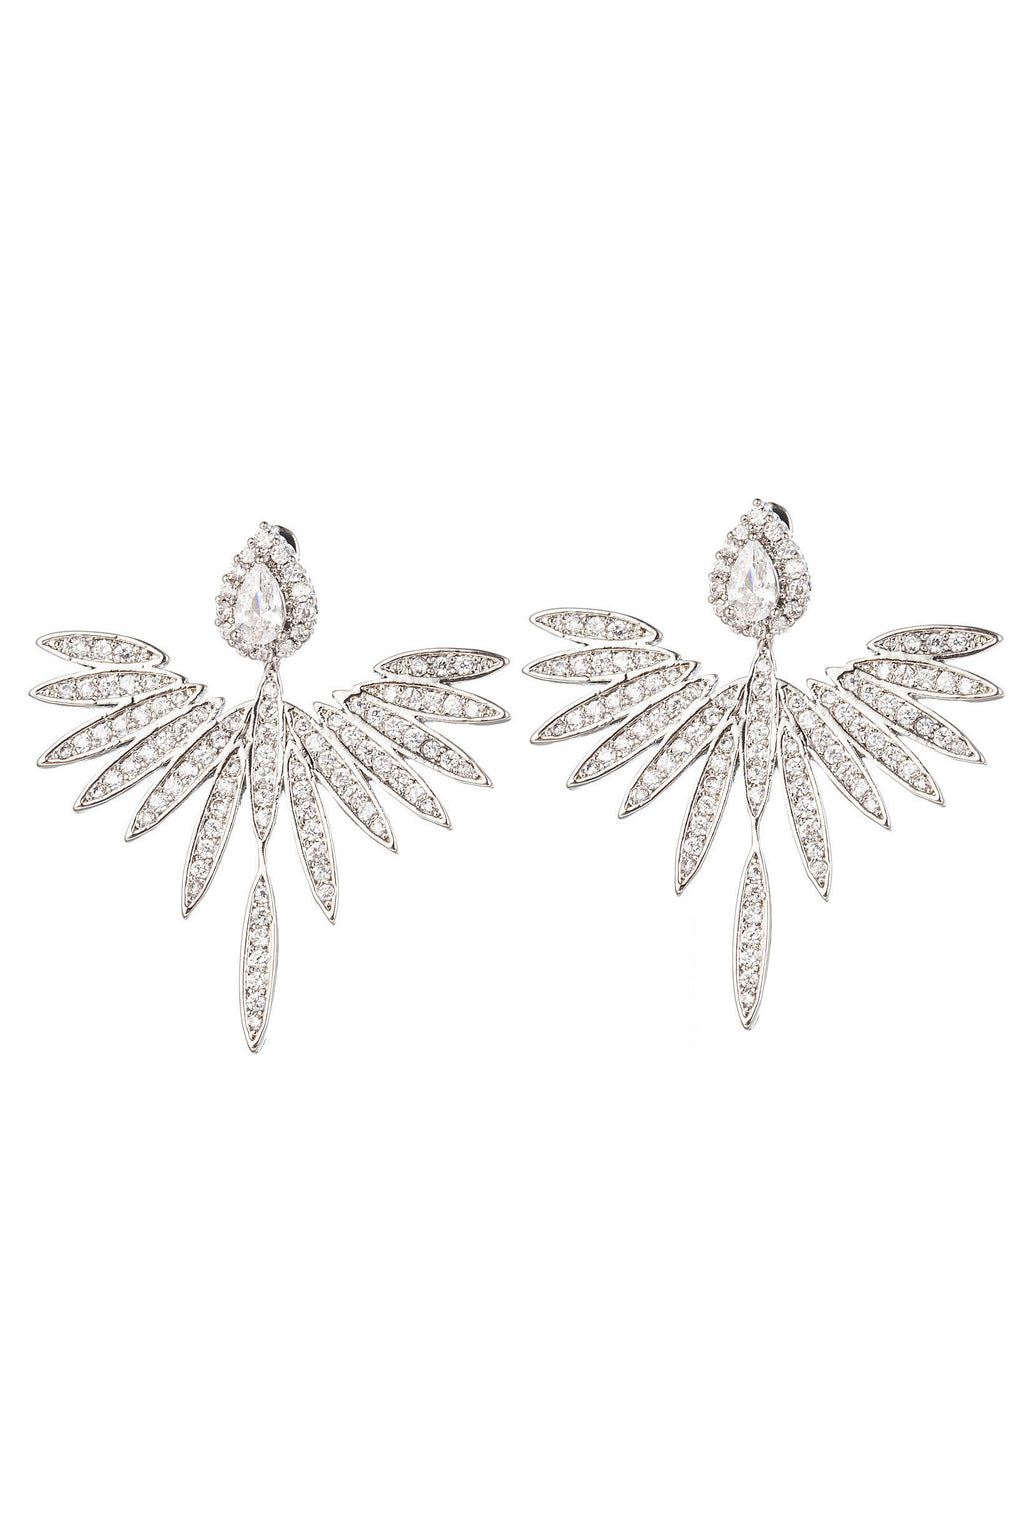 Silver brass mini angel wing earrings studded with CZ crystals.